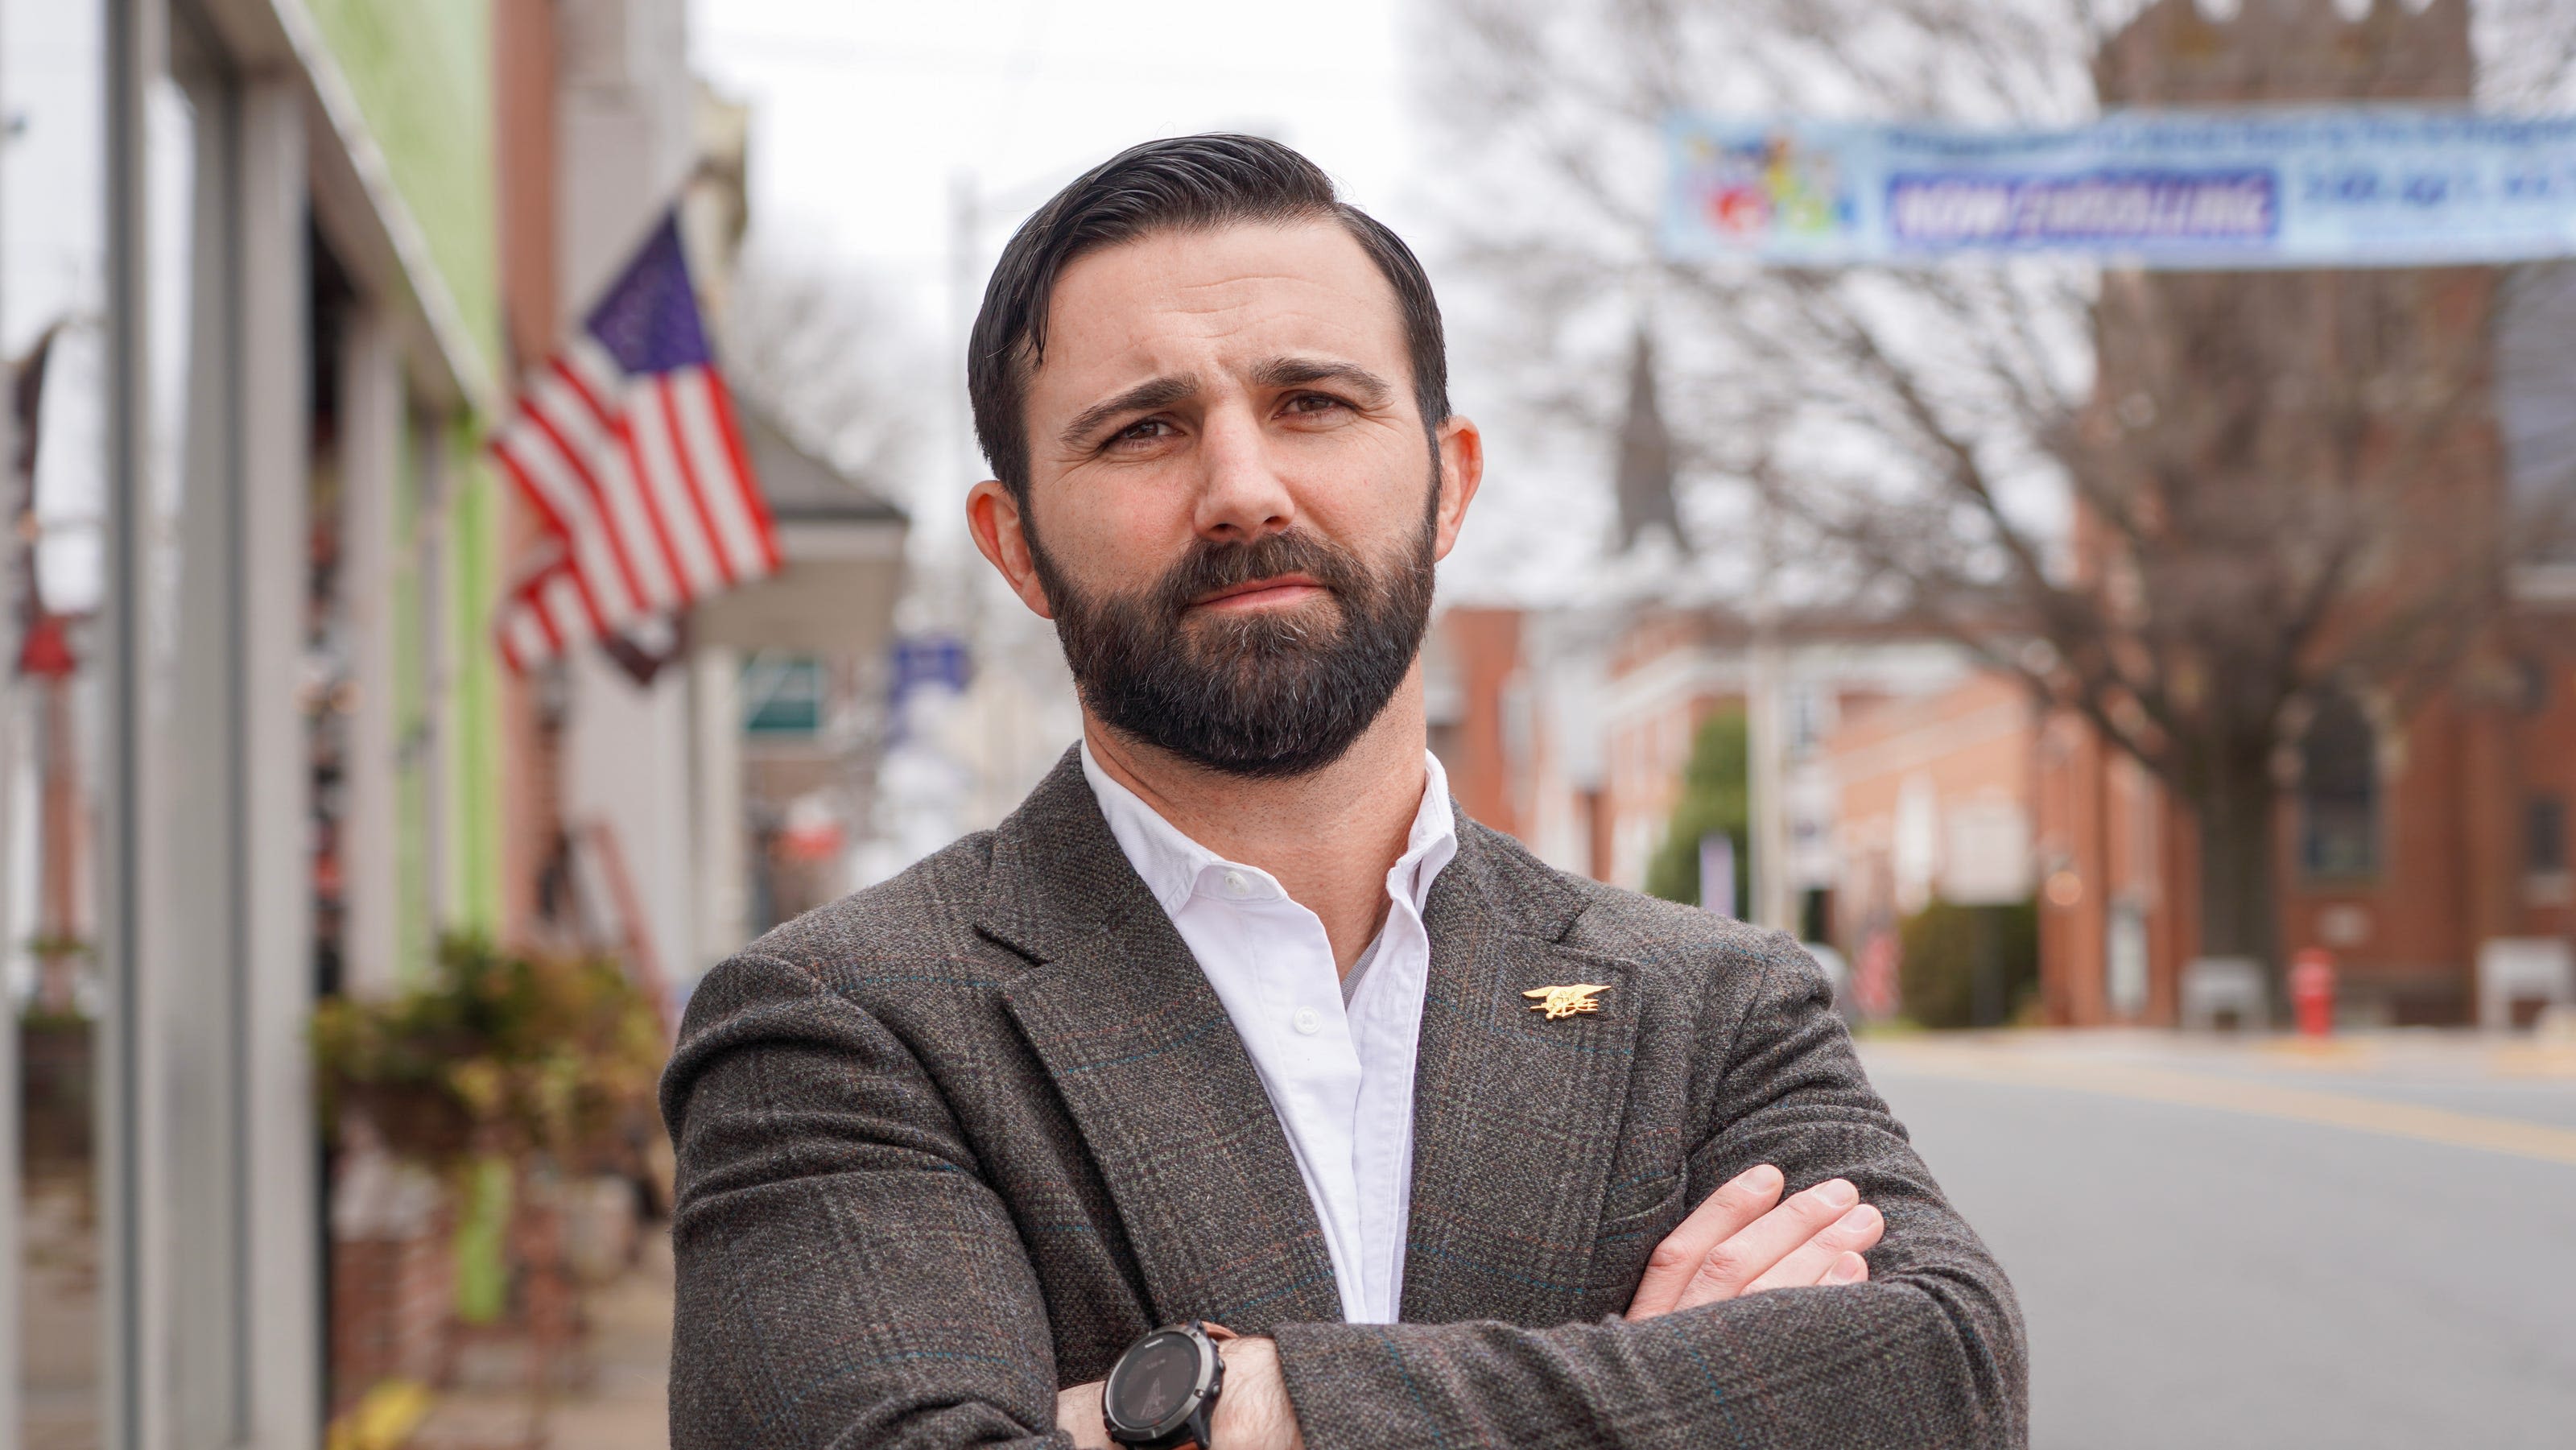 Virginia District 7 Republican candidate for Congress pledges to join House Freedom Caucus